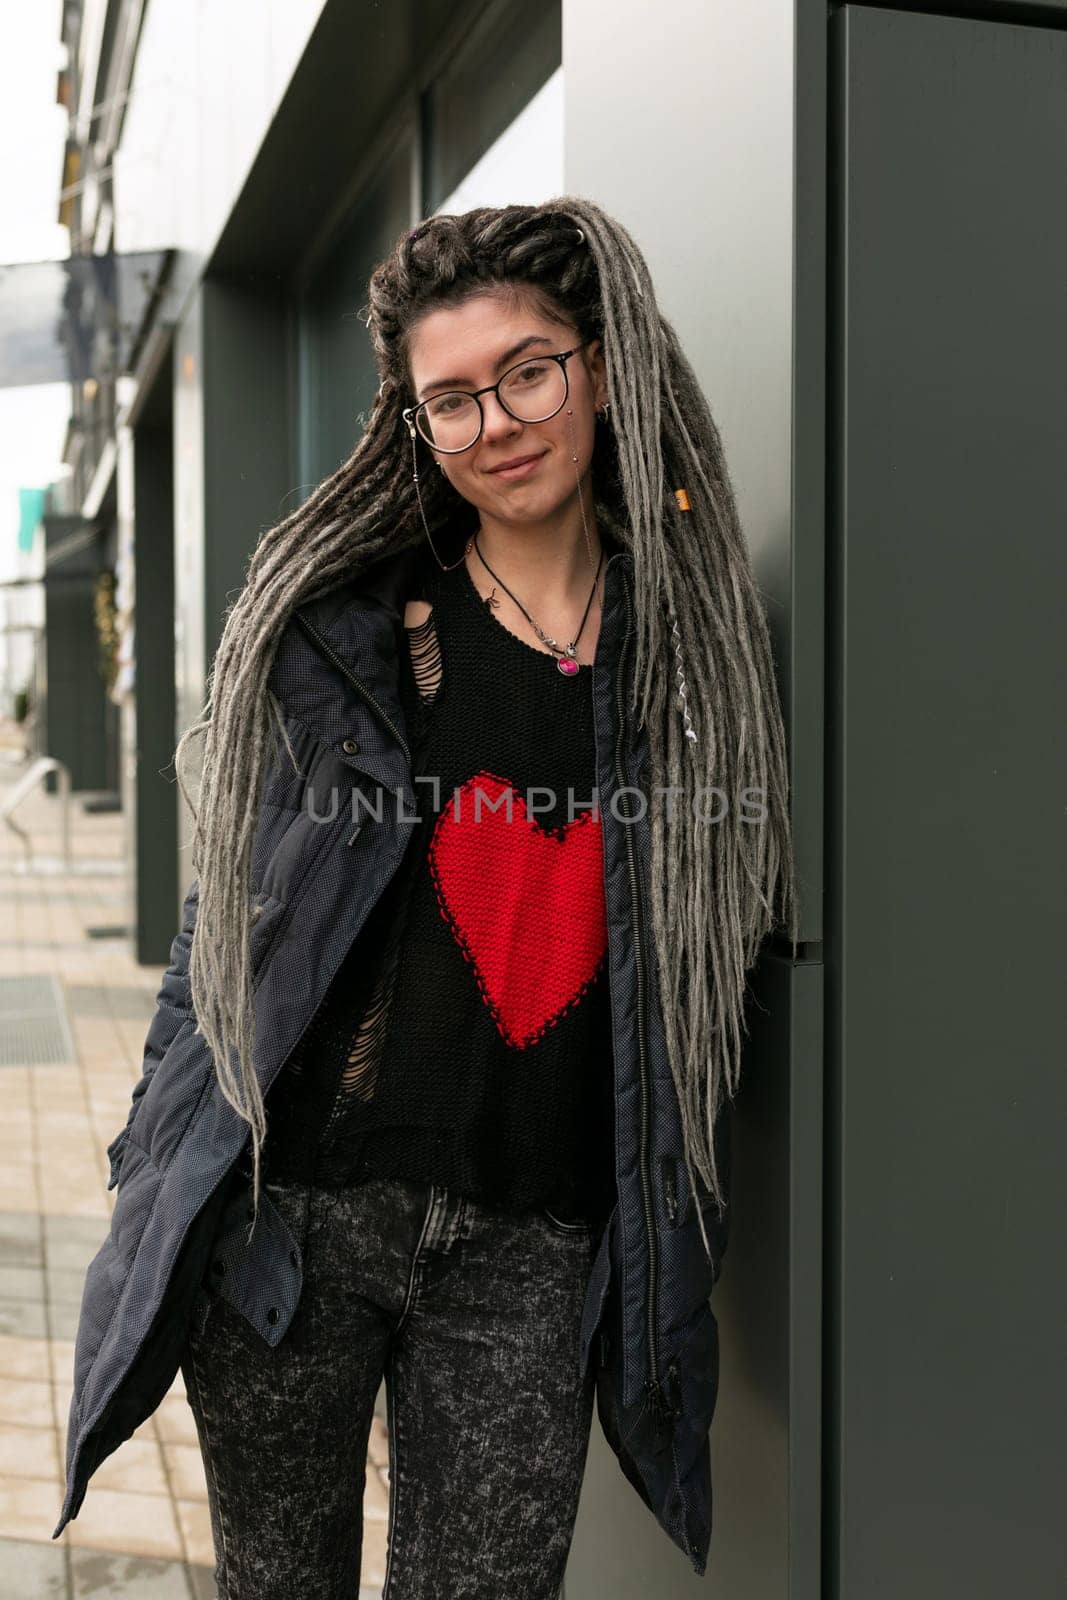 Photo on the street, young pretty informal woman with dreadlocks hairstyle smiling sweetly by TRMK